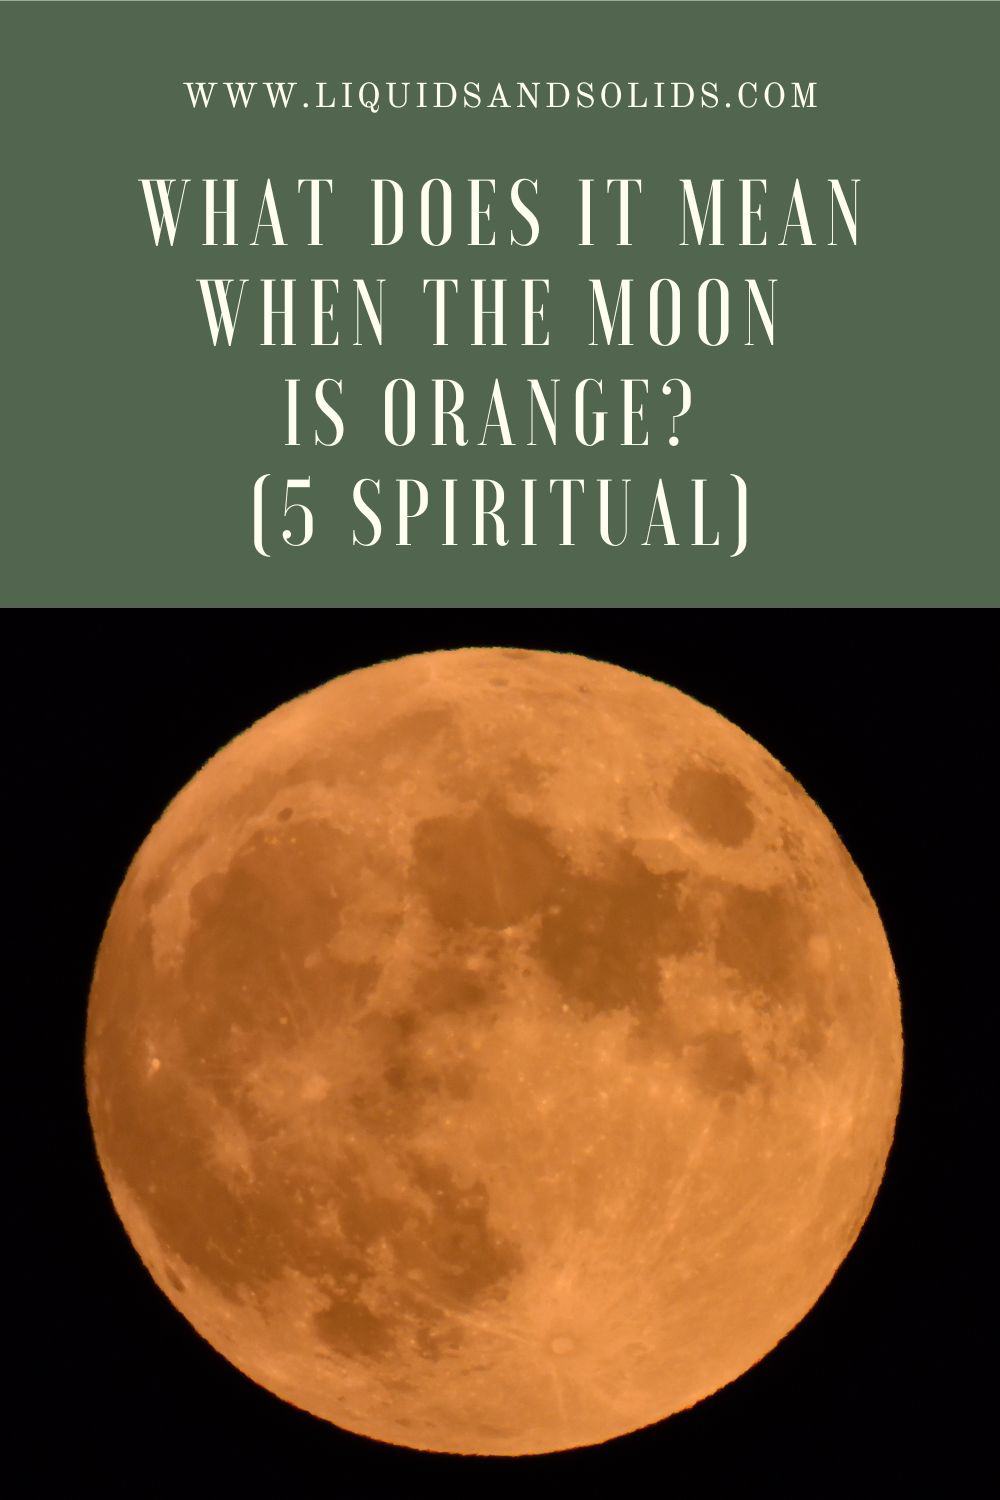 Why Does The Moon Look Orange?